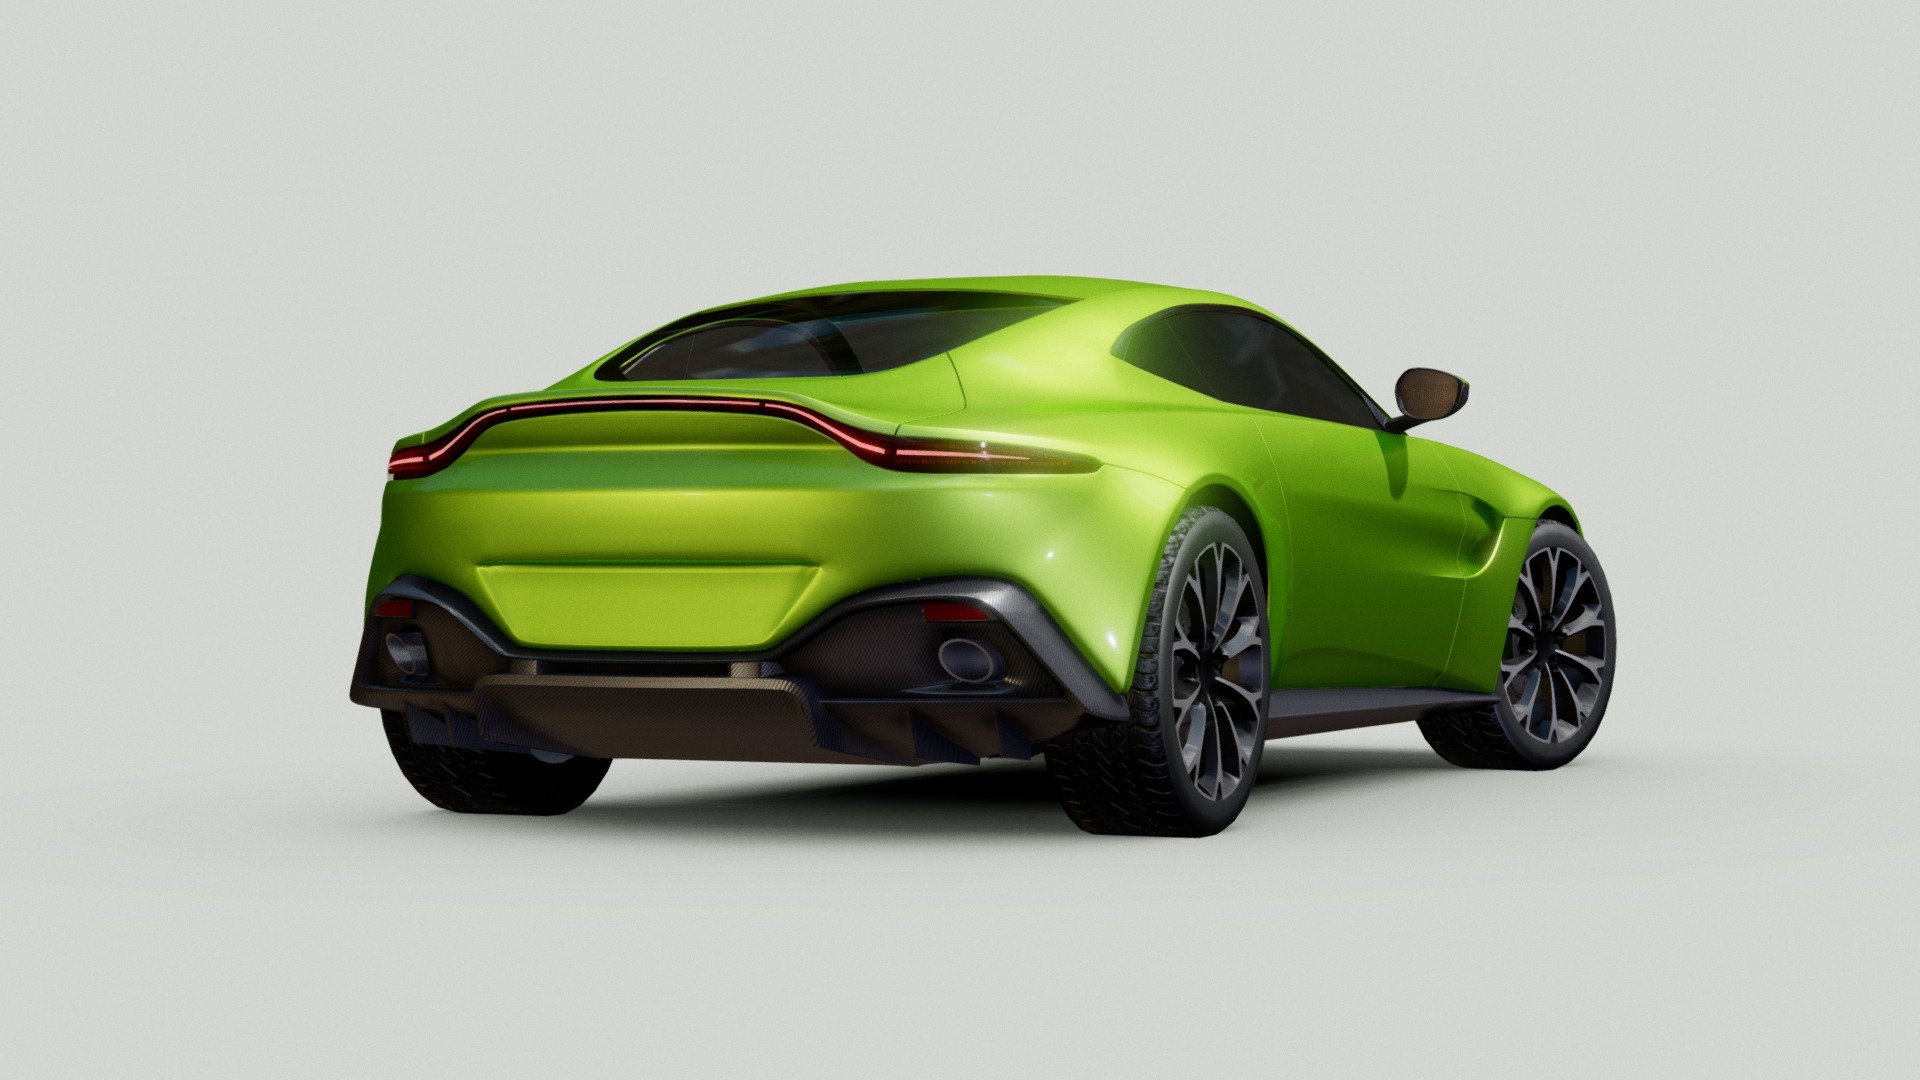 Introducing the 2018 Aston Martin Vantage V8 Coupe, a midpoly 3D model of the stunning sports car. This model captures the sleek design and exhilarating performance of the real vehicle, with wheels and calipers hinged at accurate points for easy animation and customization. The model is optimized for use in realtime rendering, with clean topology, efficient UV mapping and realistic PBR textures. Whether you need it for a game, a simulation or a visualization project, this model will enhance your scene with its elegance and speed.

Available on BMC and Cgtrader 3d model